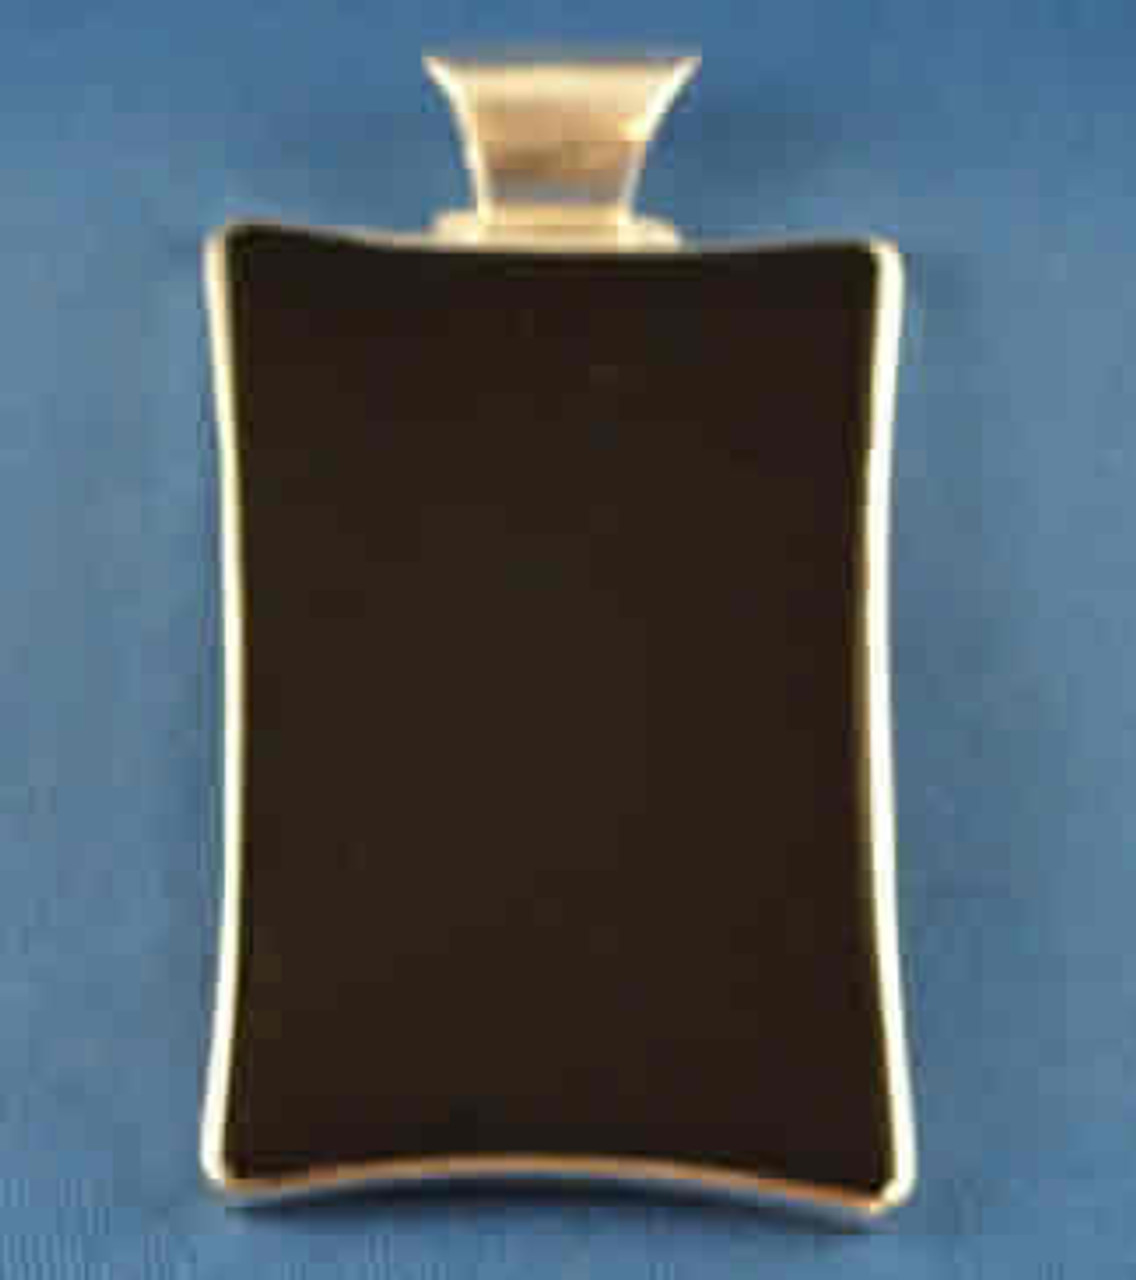 HS-189VBO: Large Vertical Rectangle Black Onyx Pendent mounted in Sterling Sliver, Engravable Area, 2-1/8 inch x 1-3/8 inch.